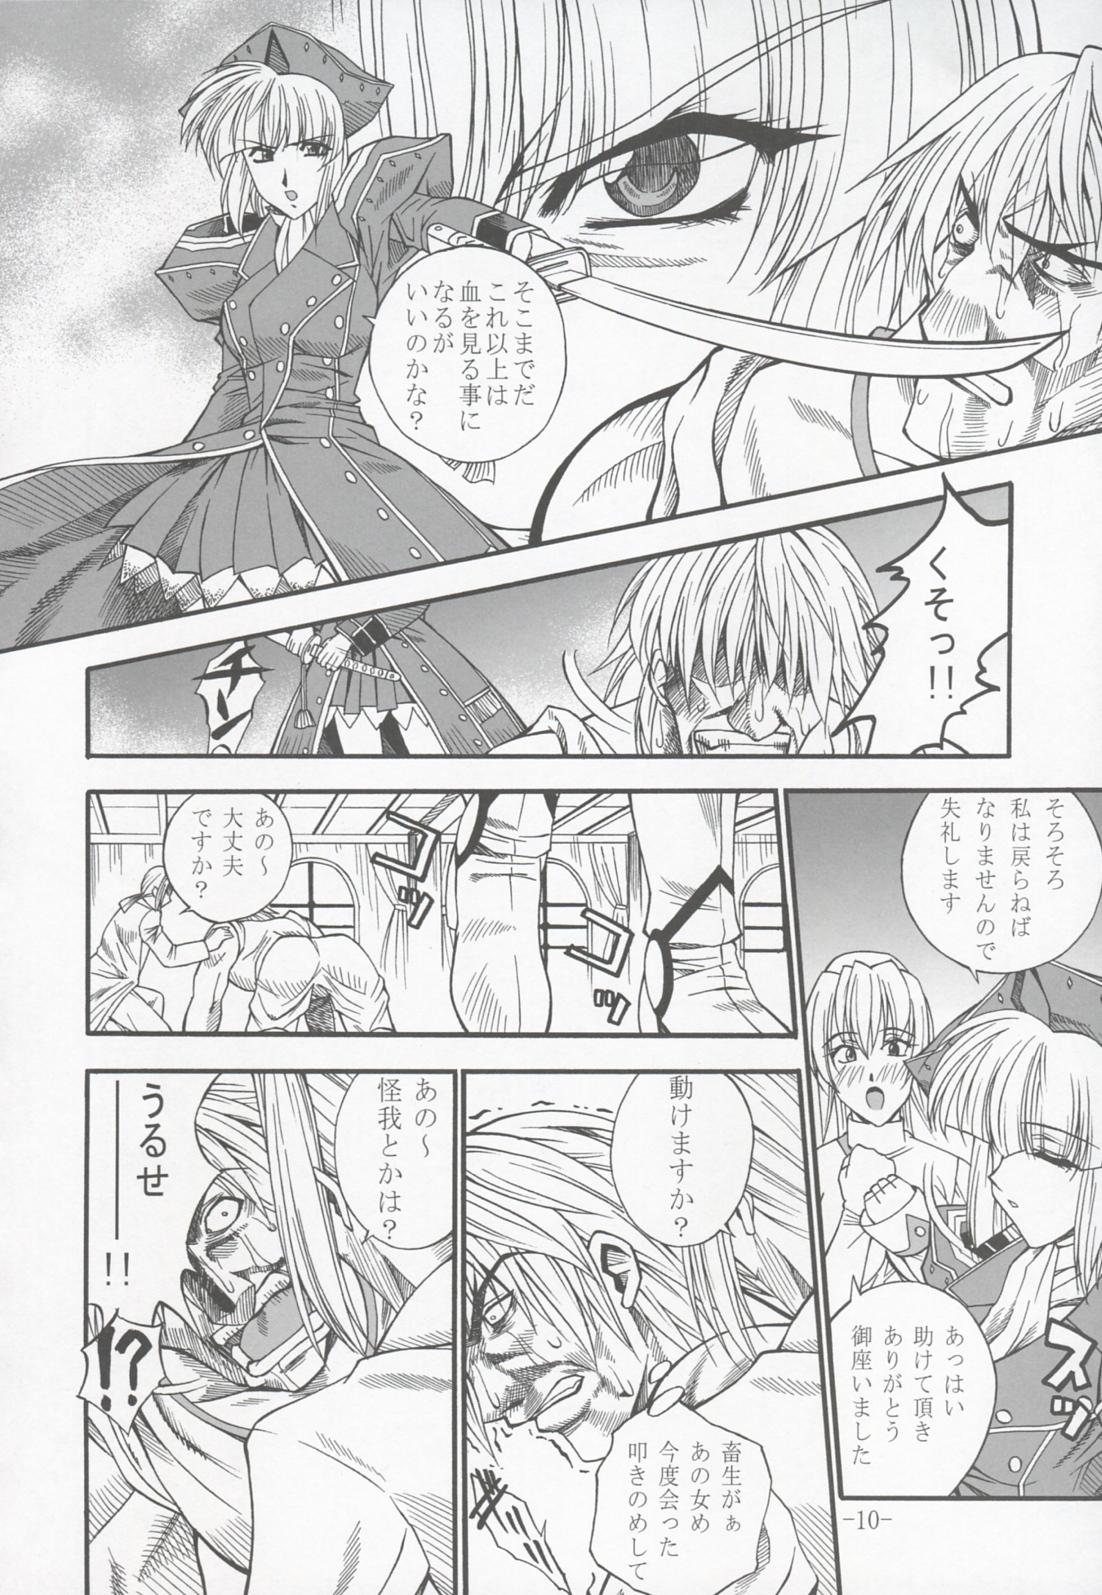 Foreplay GUROW Vol.I - Growlanser Huge Boobs - Page 9